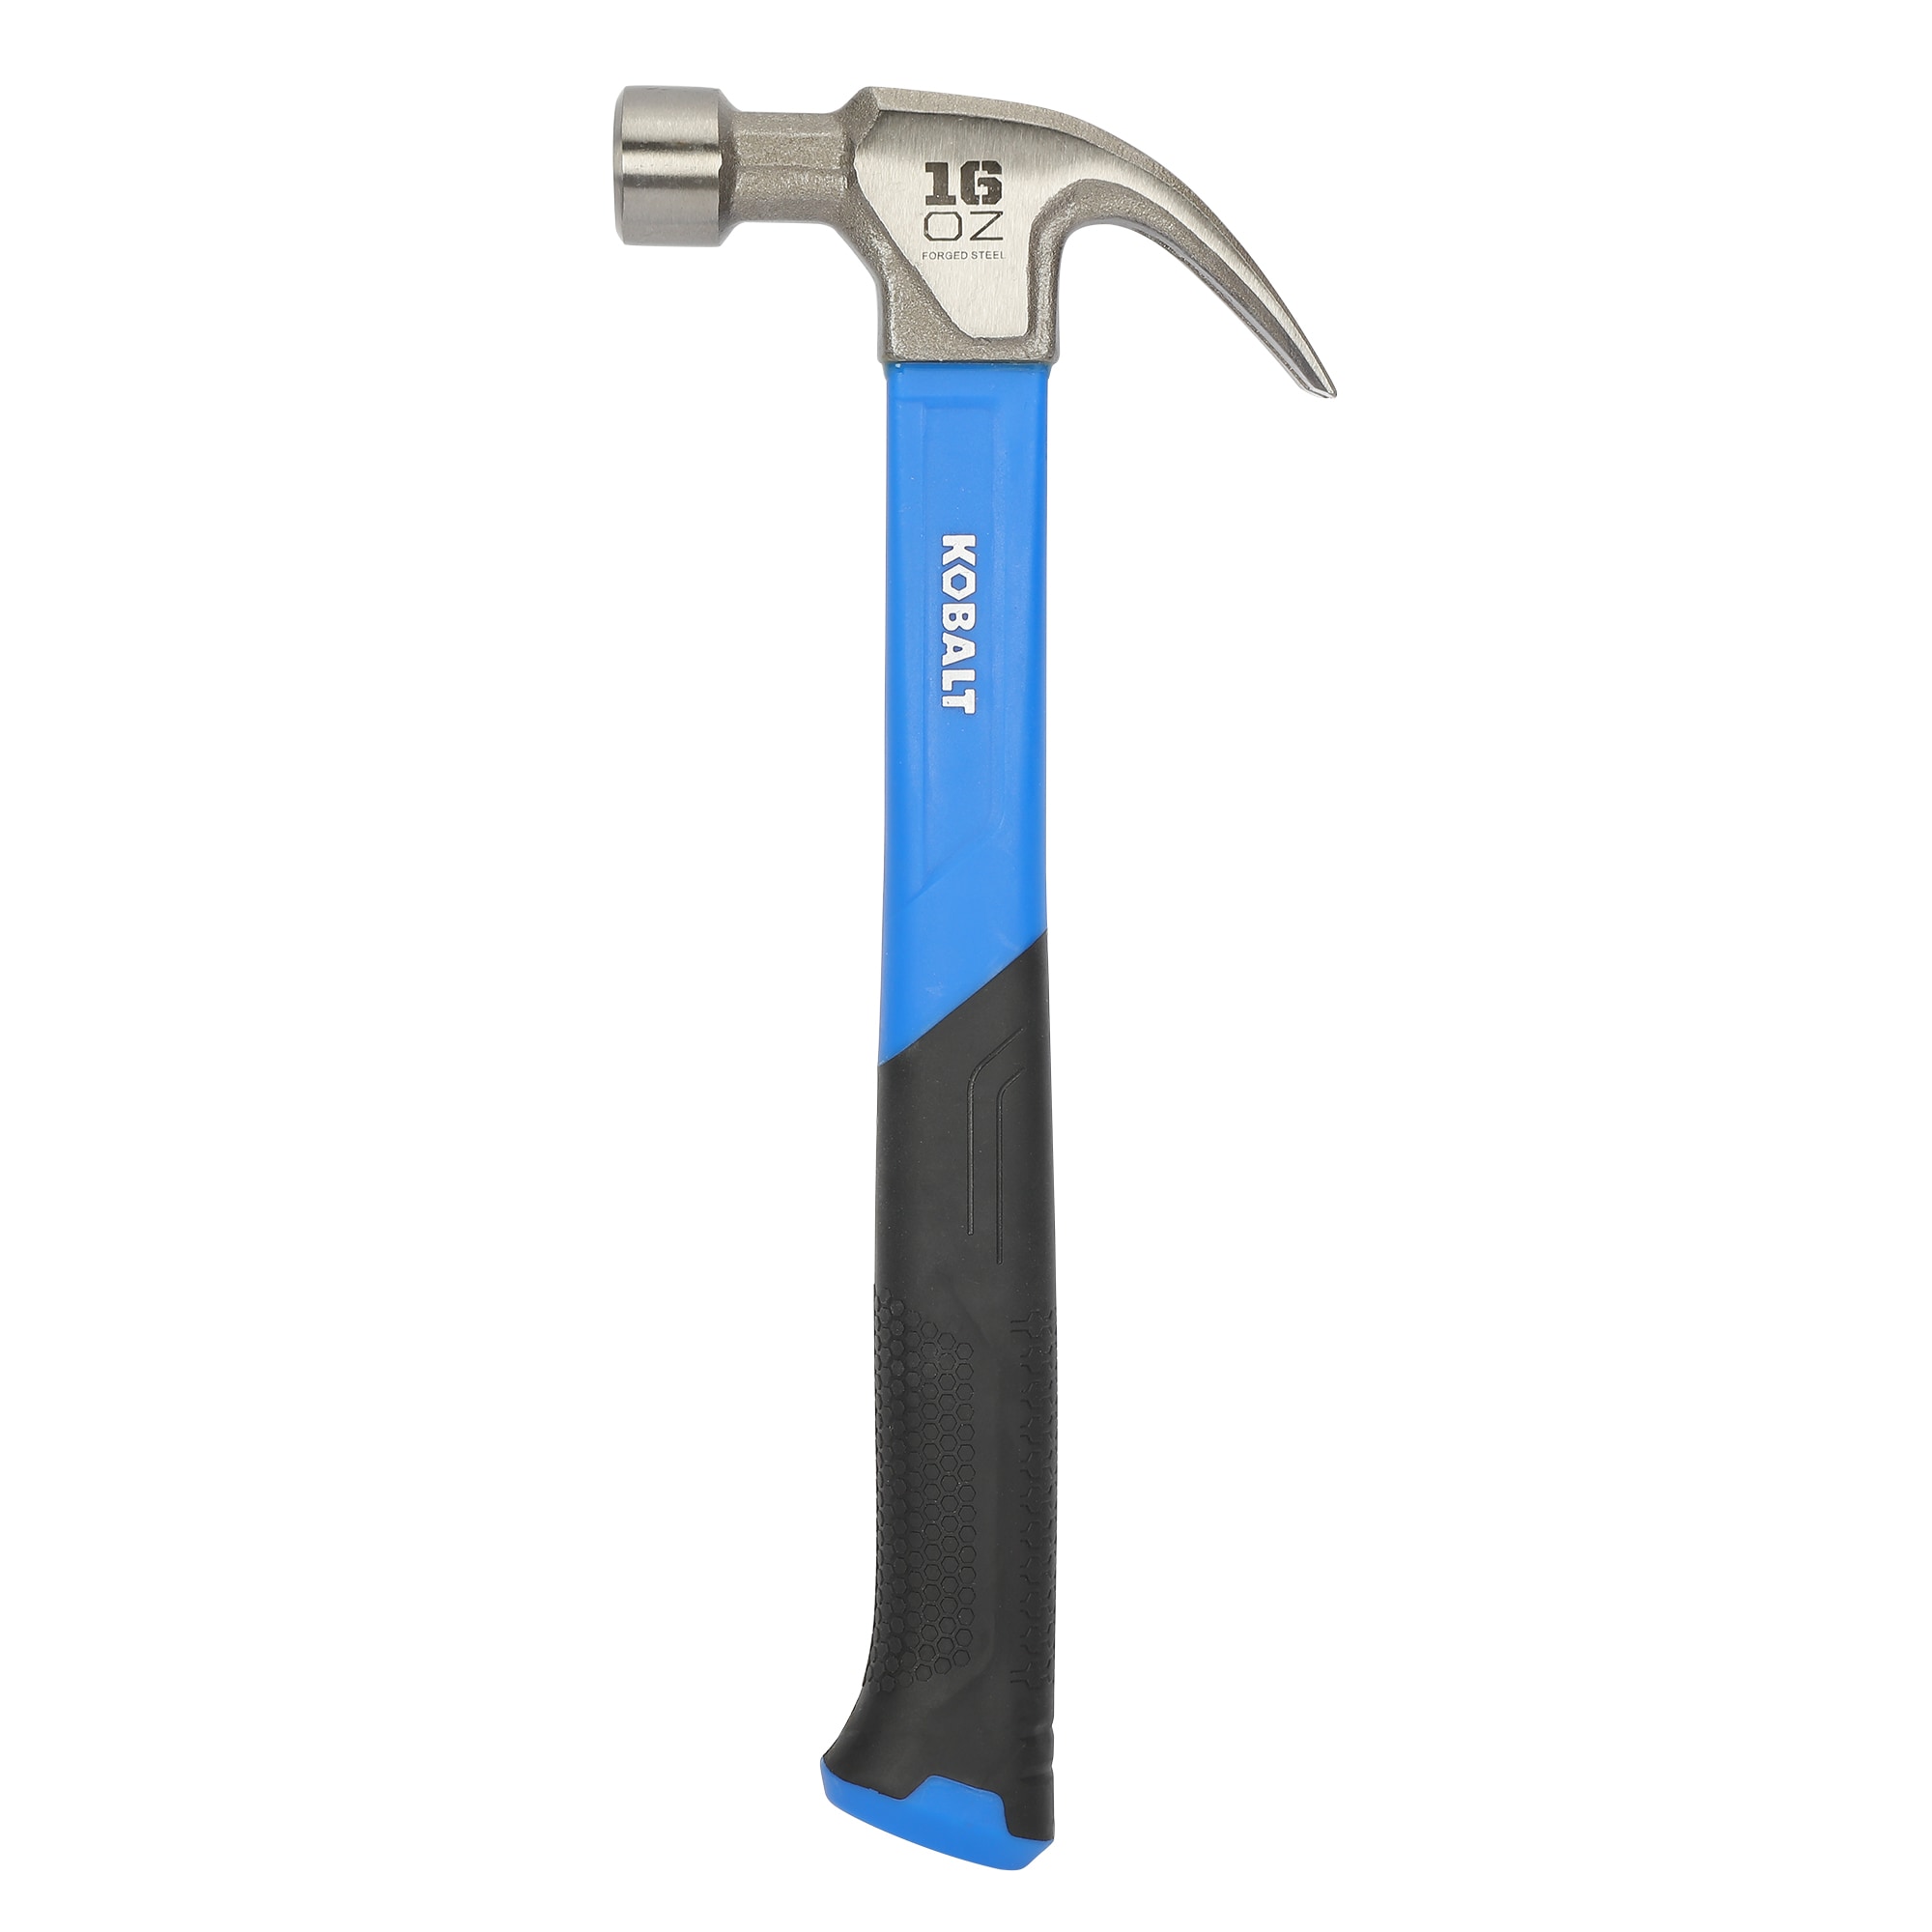 Estwing Hammers at Lowes.com